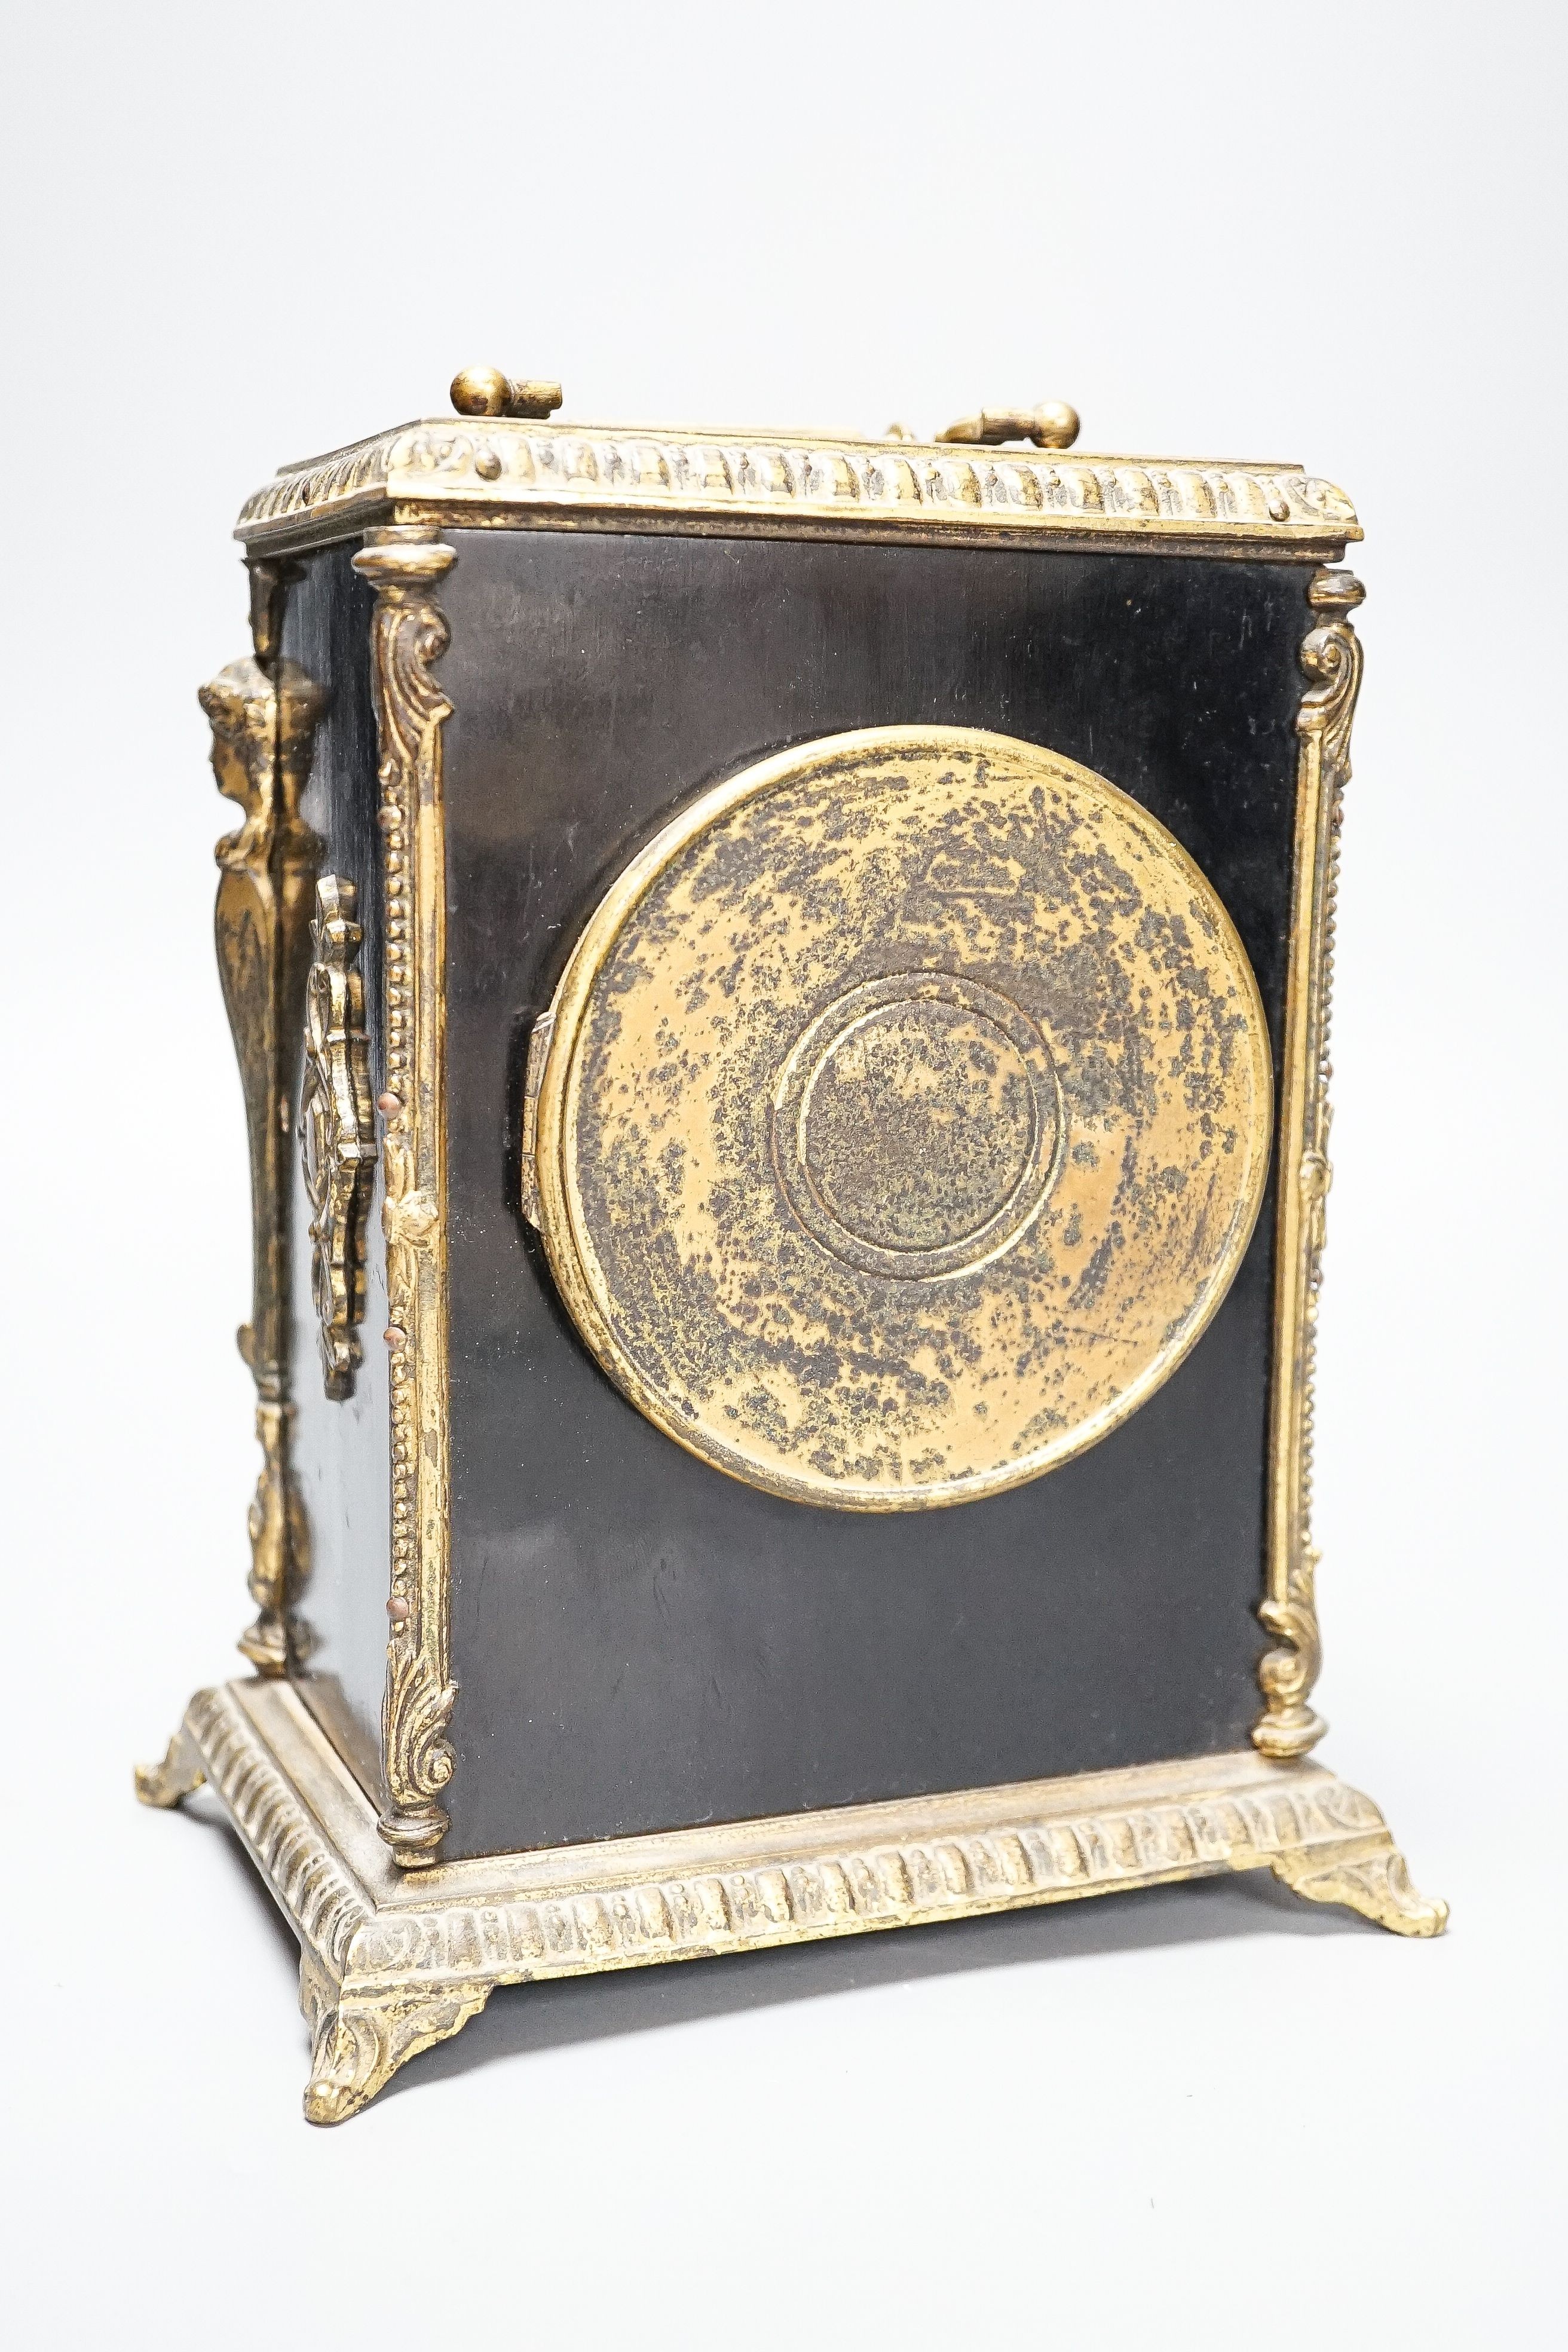 A 19th century French ebonised and ormolu-mounted mantel clock with key, 27cm including handle